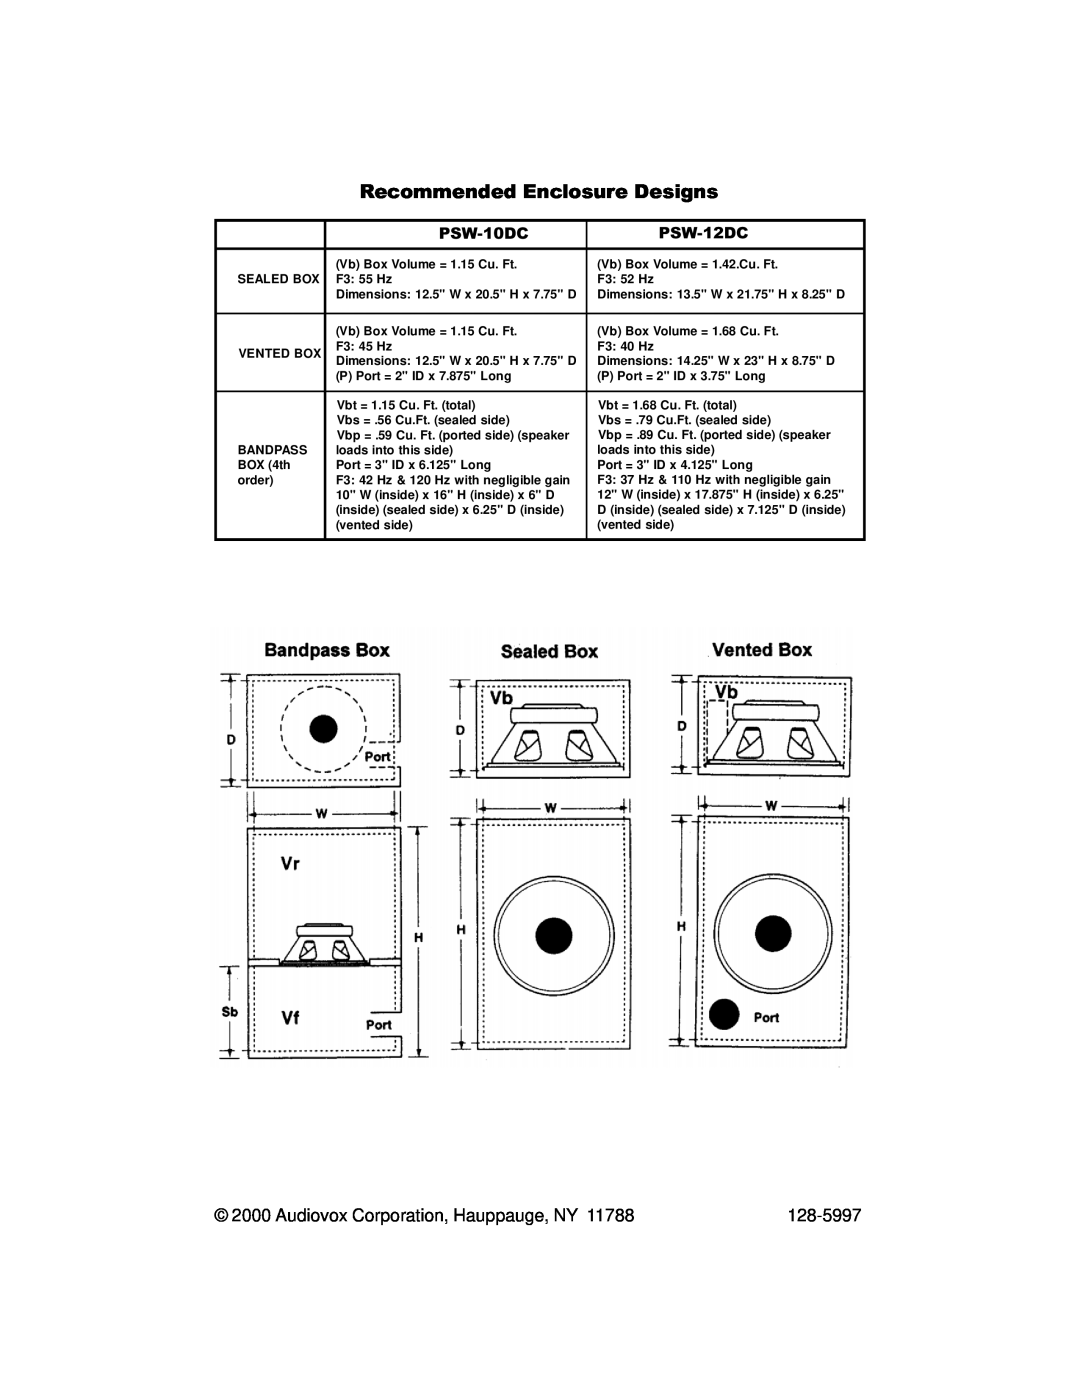 Audiovox PSW-10DC manual Recommended Enclosure Designs, Audiovox Corporation, Hauppauge, NY, 128-5997, PSW-12DC 